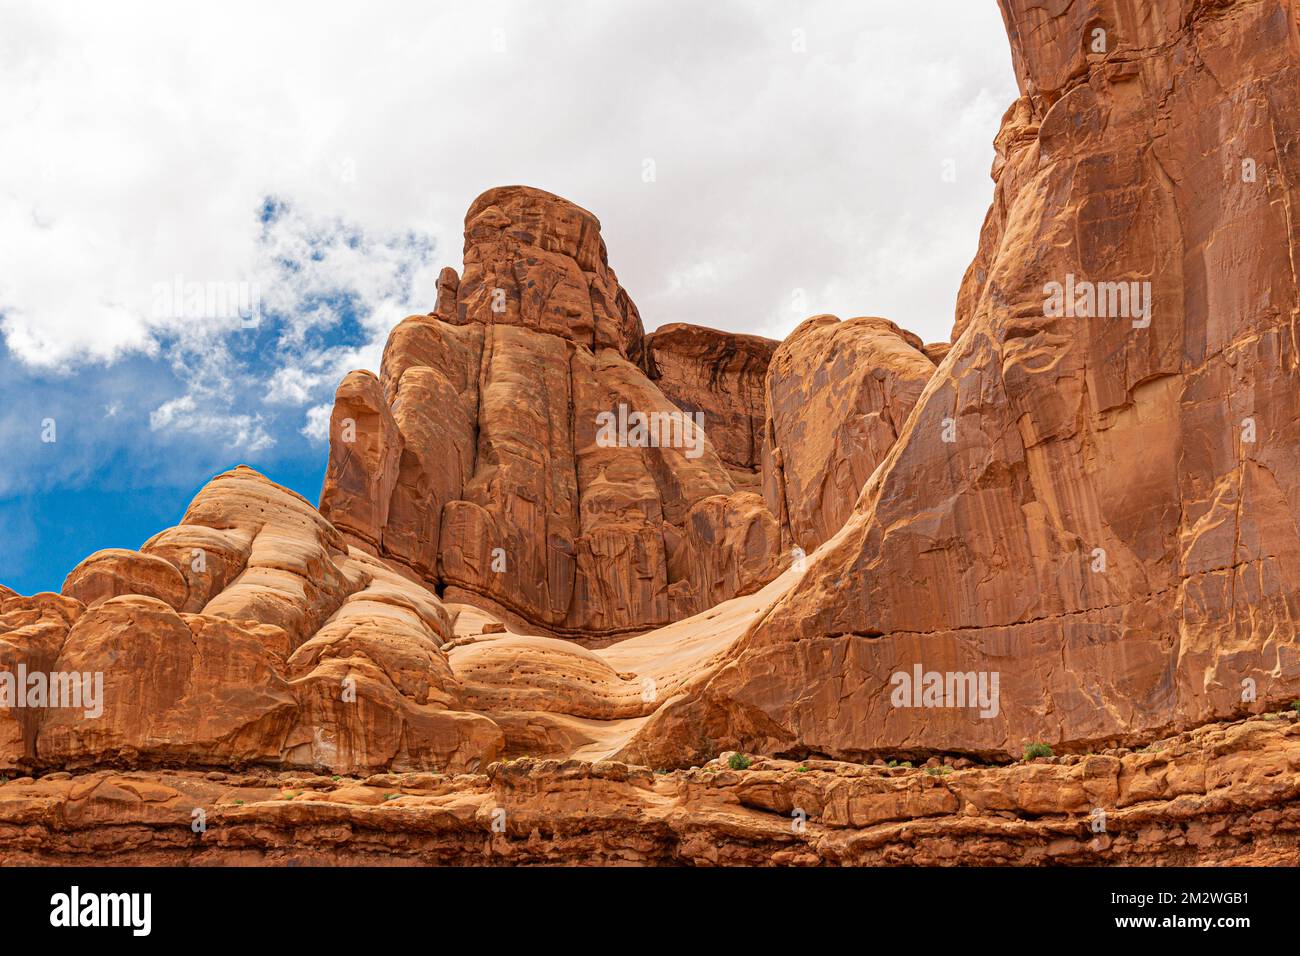 Red sandstone structures at the start of the Park Avenue Trail, Courthouse Towers Area,  in Arches National Park, Moab, Utah. USA Stock Photo